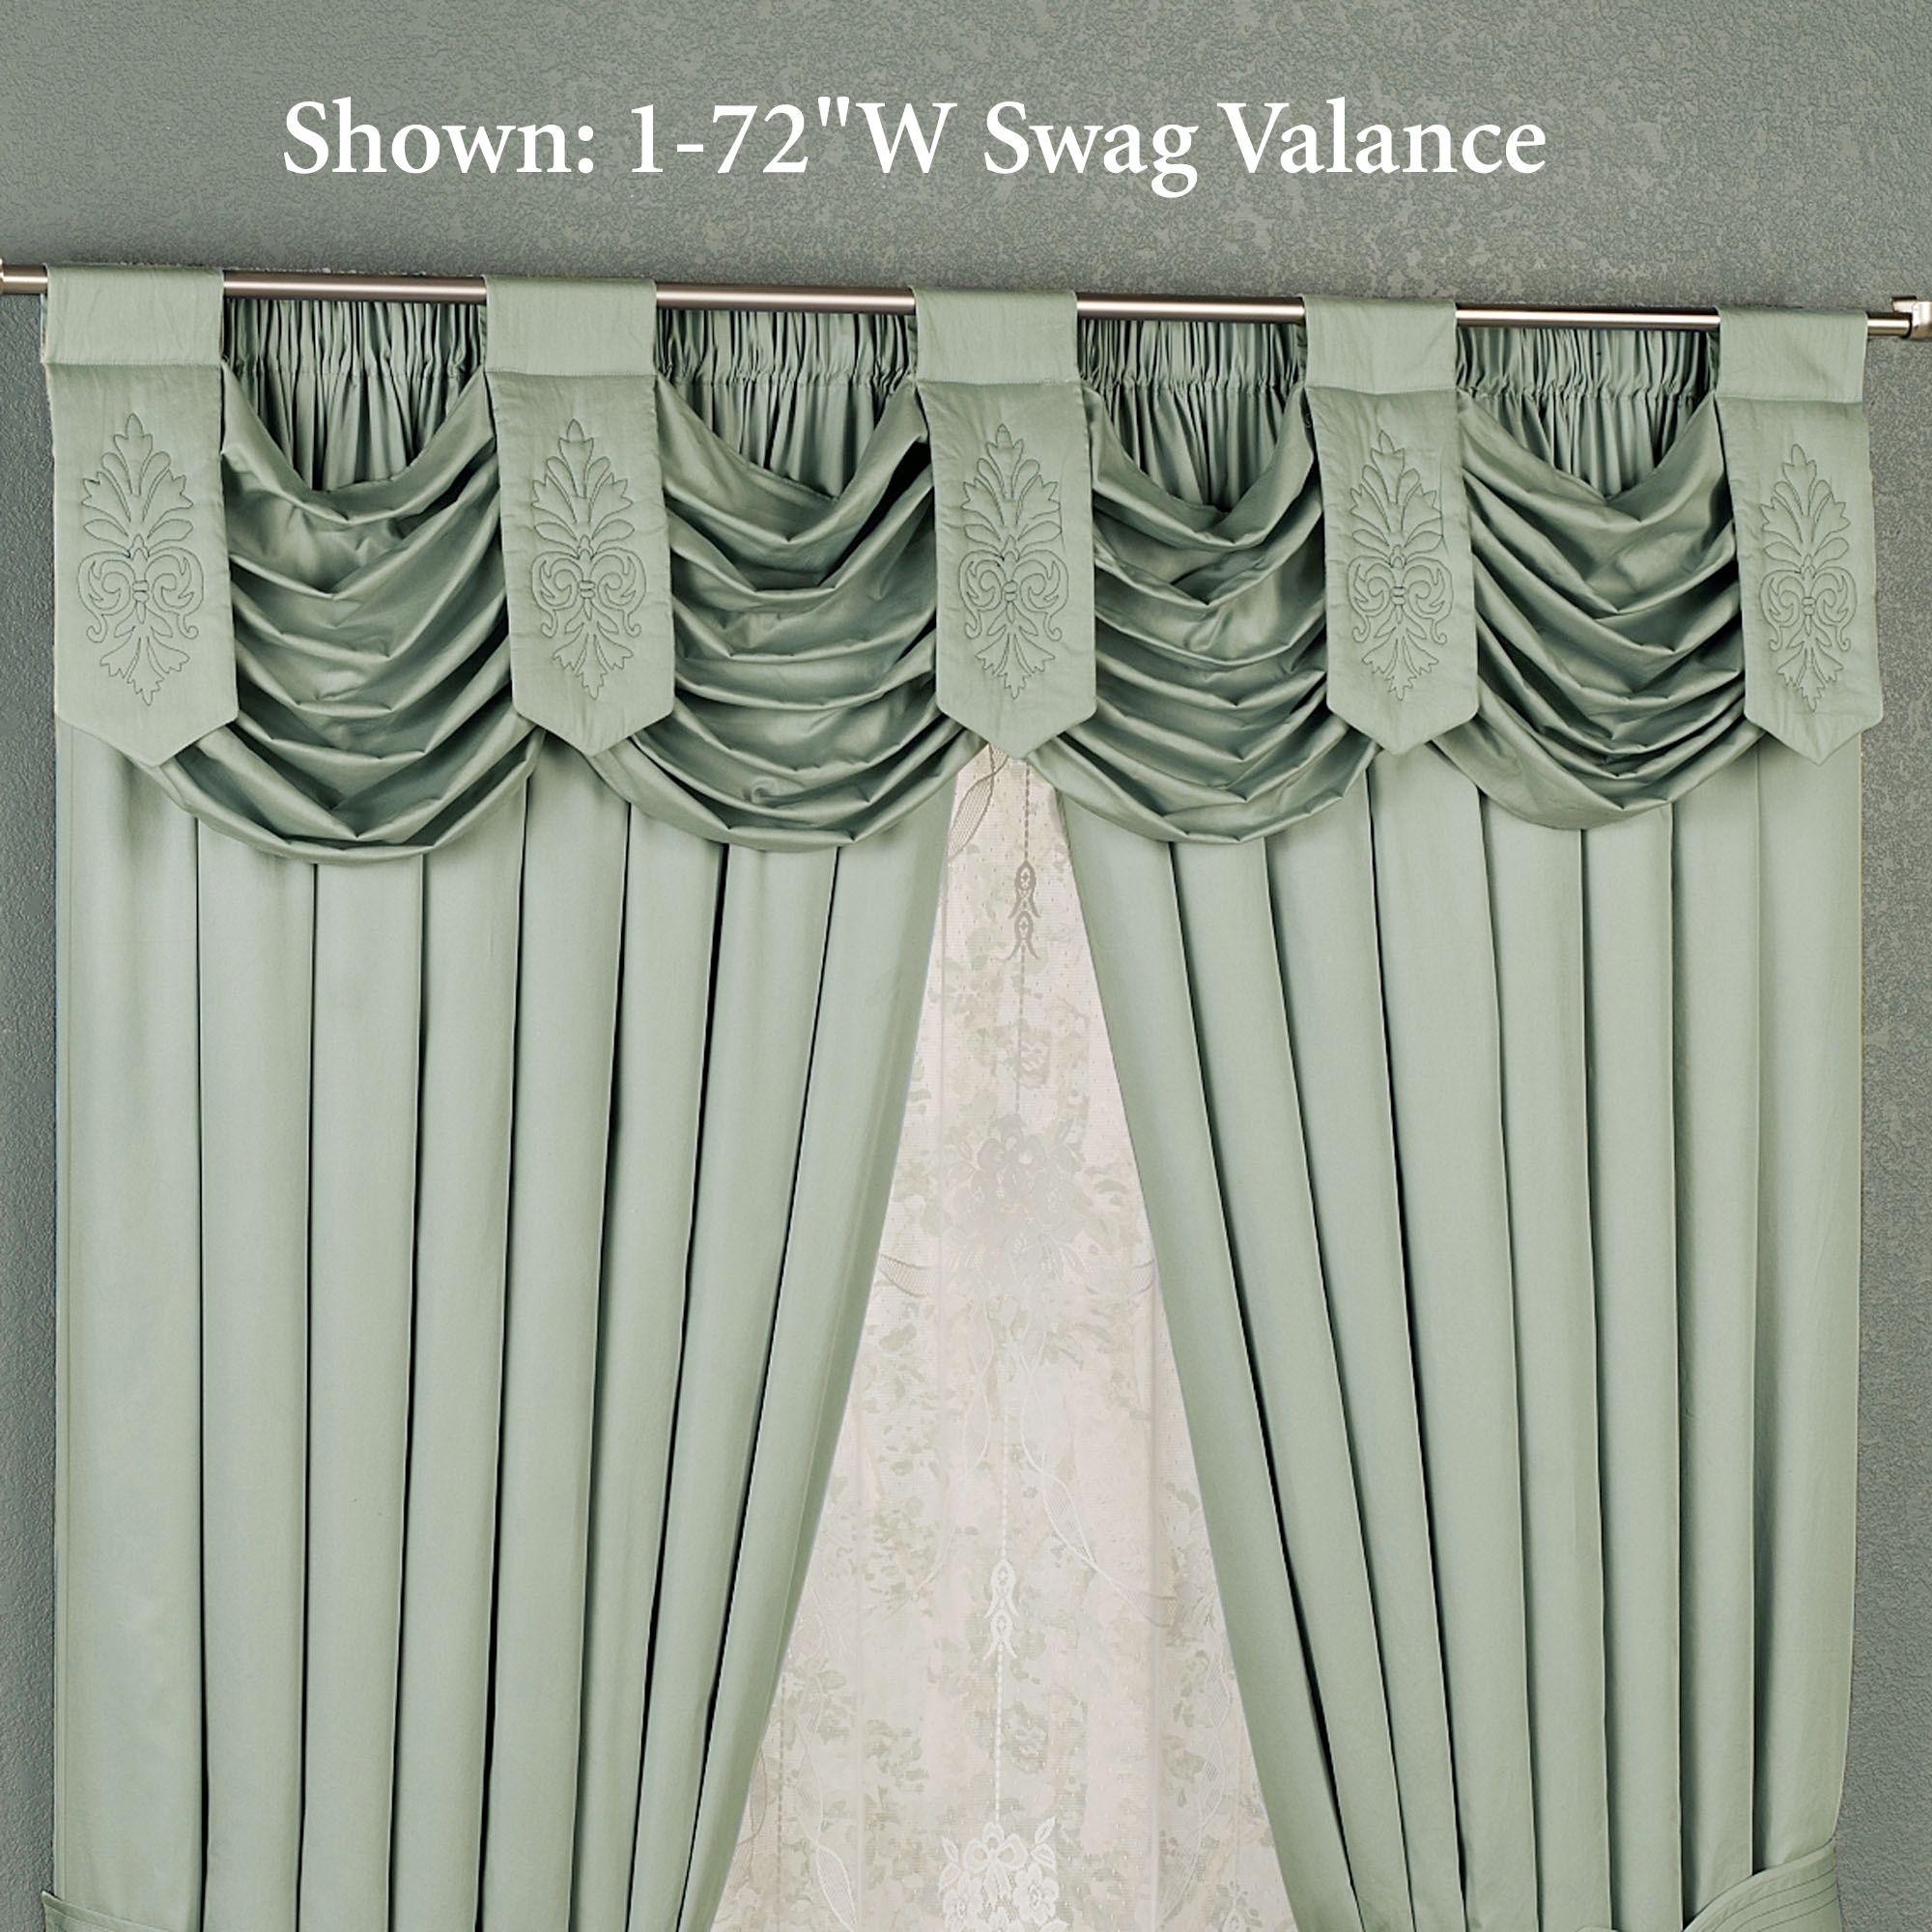 Double Swag Shower Curtain with Valance